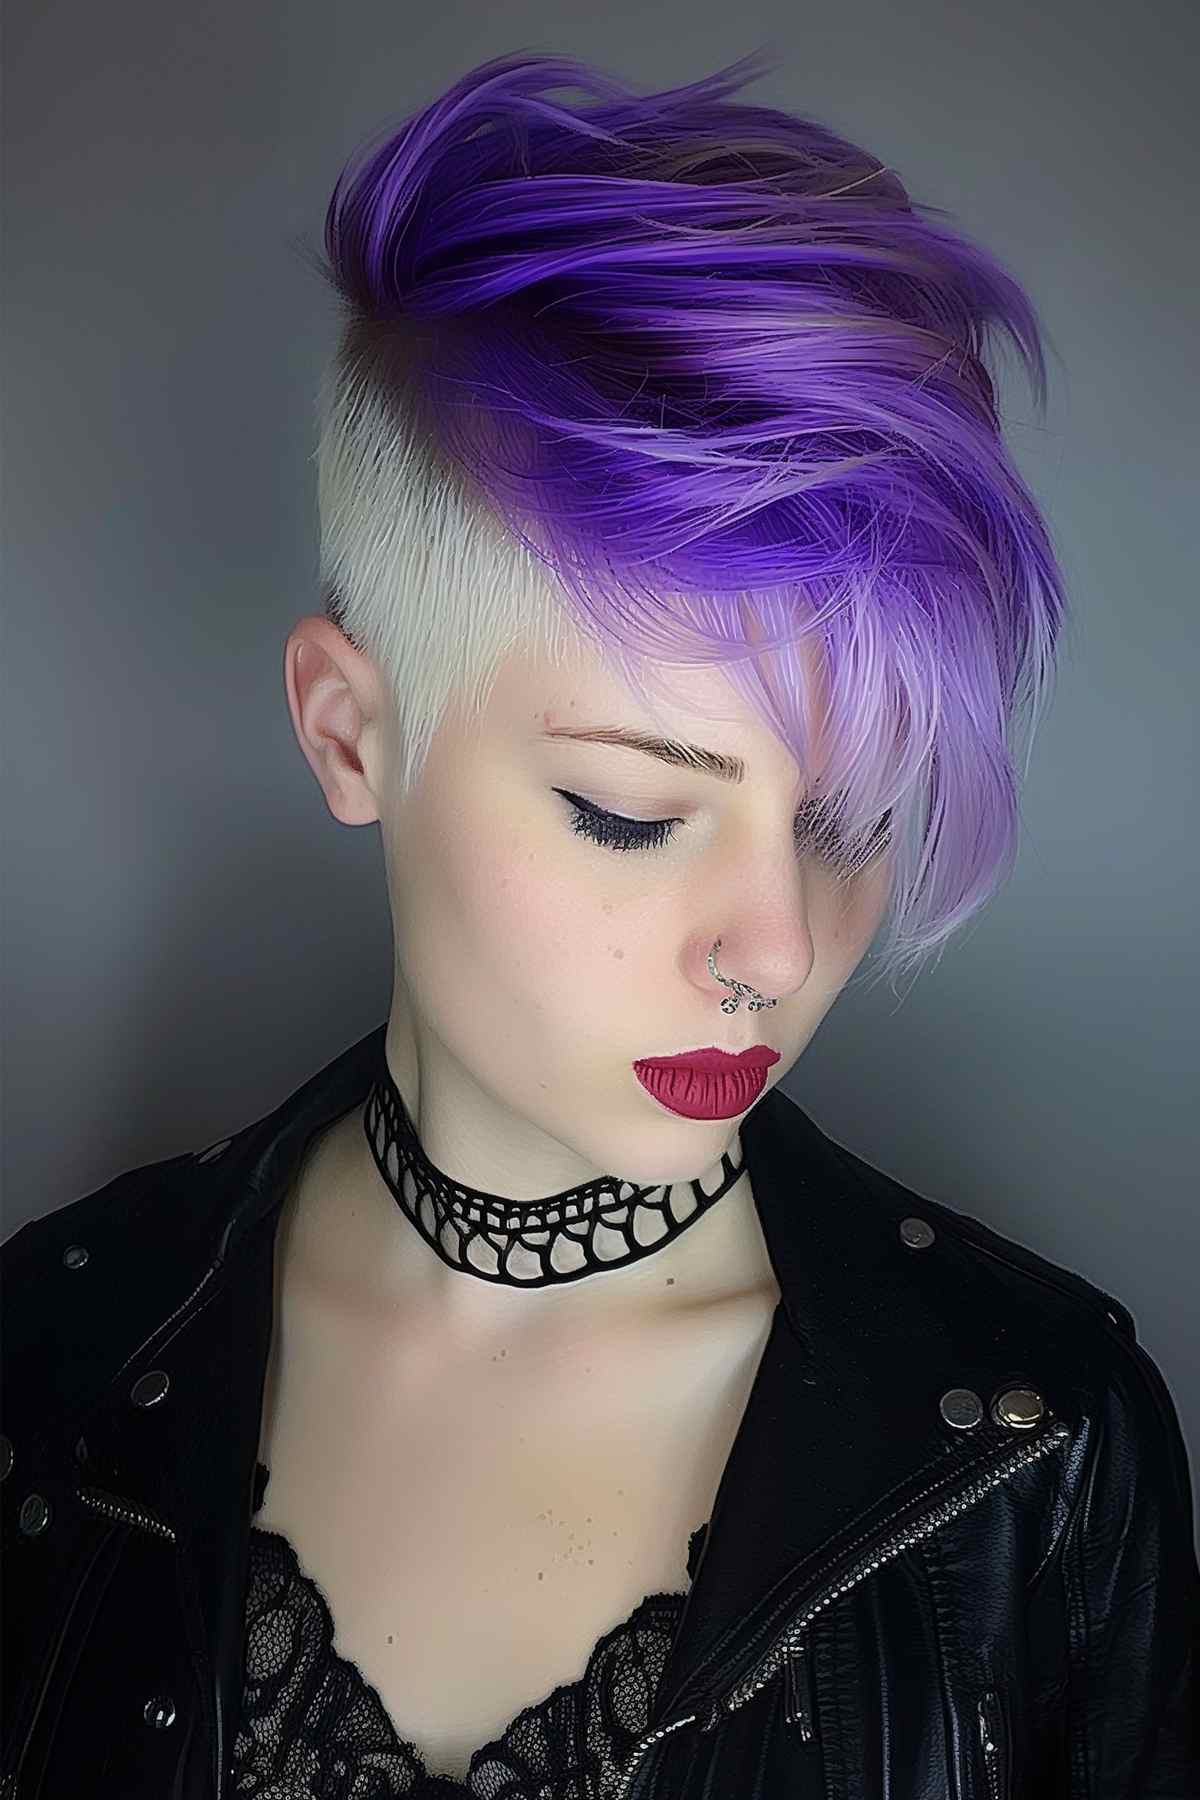 Punk pixie cut with long purple bangs and stark white sides, offering a bold color contrast and versatile styling options.